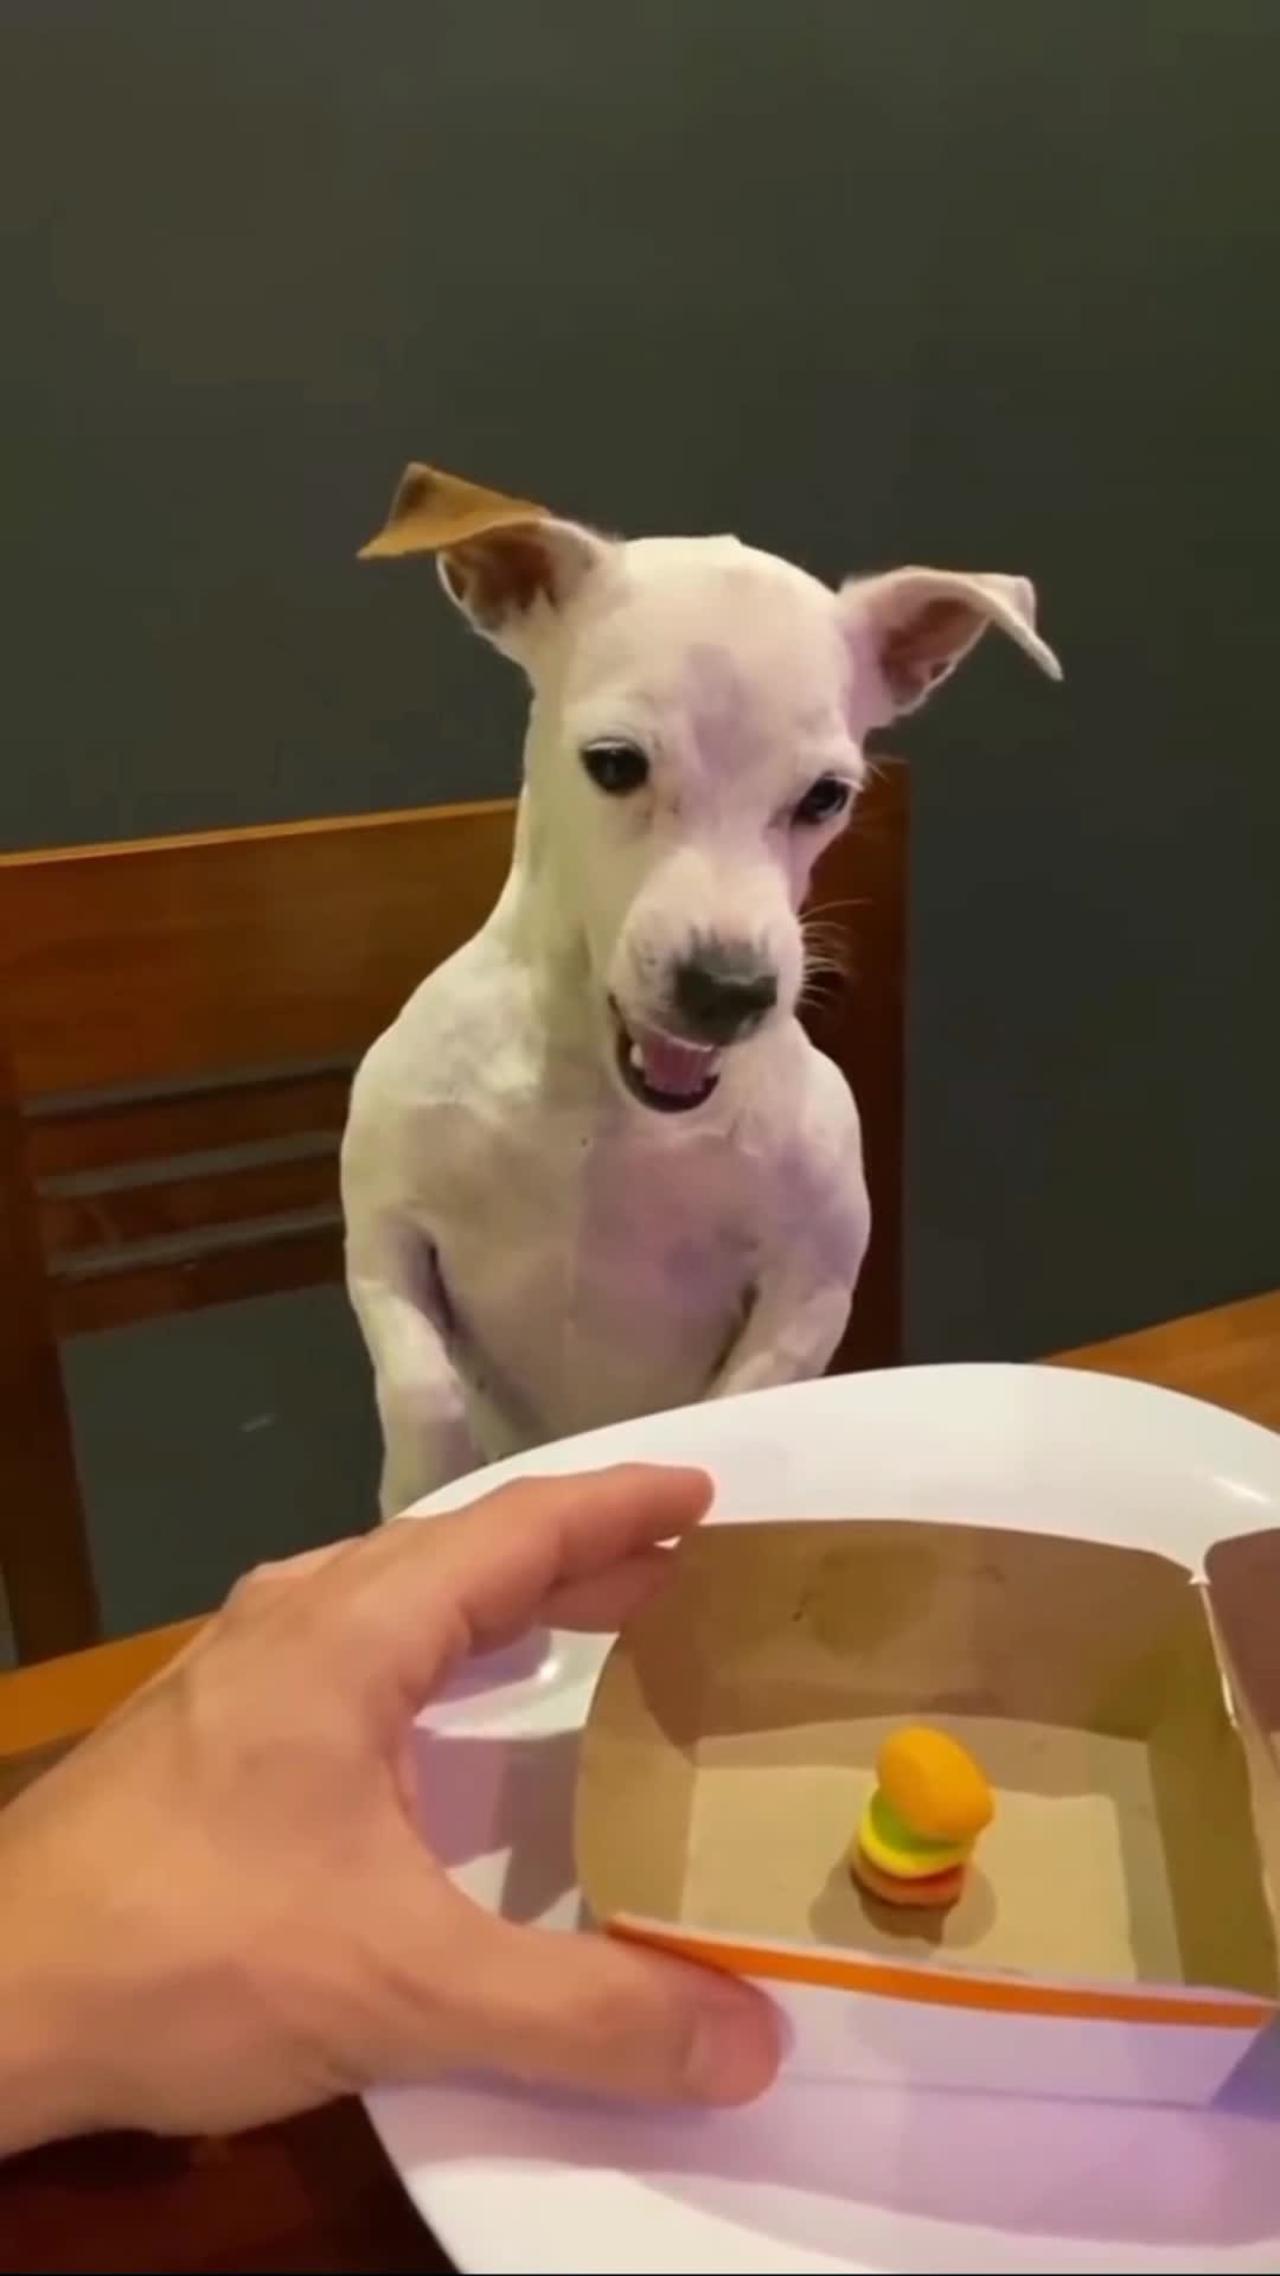 Dog at McDonald's | this is an injustice | #funn #funny #Entertainment #dog